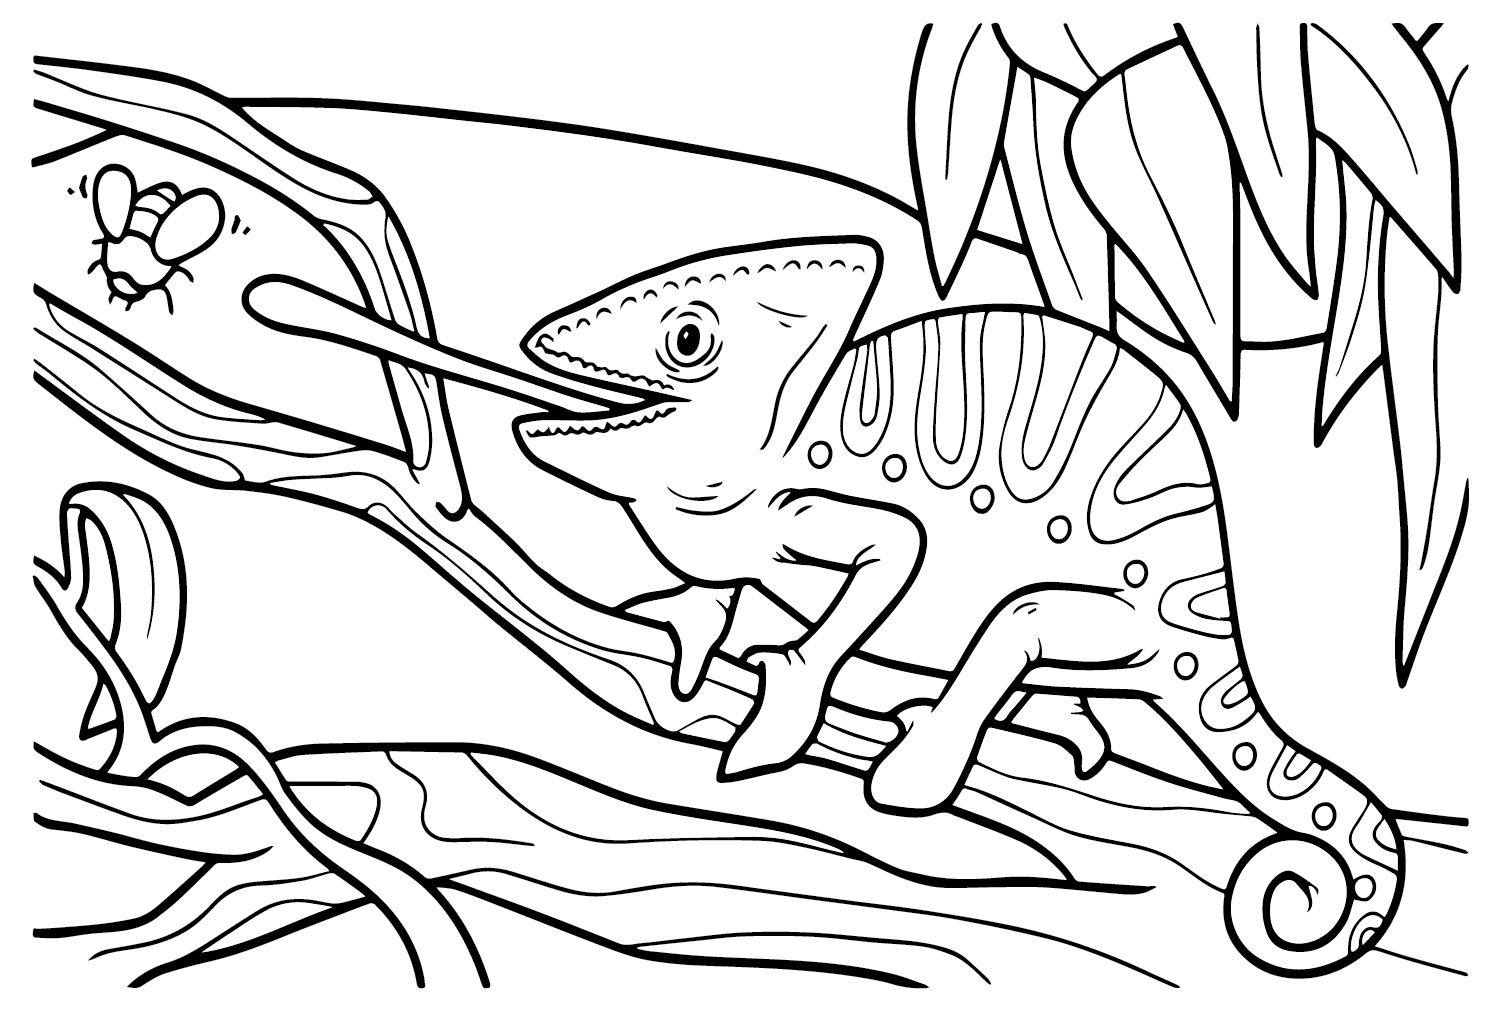 37 Free Printable Chameleon Coloring Pages